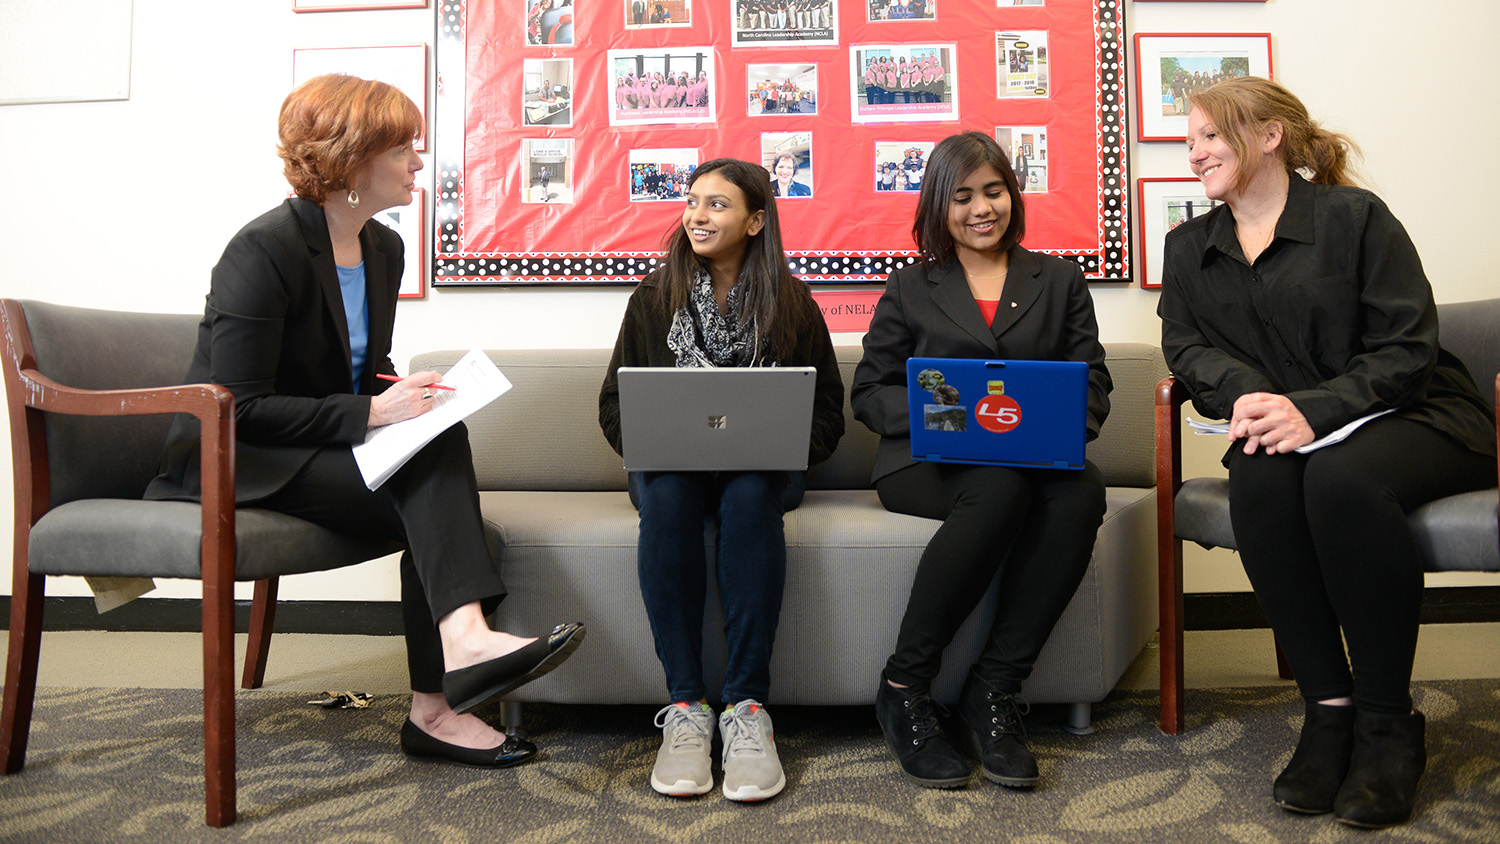 students sitting on couch with laptops